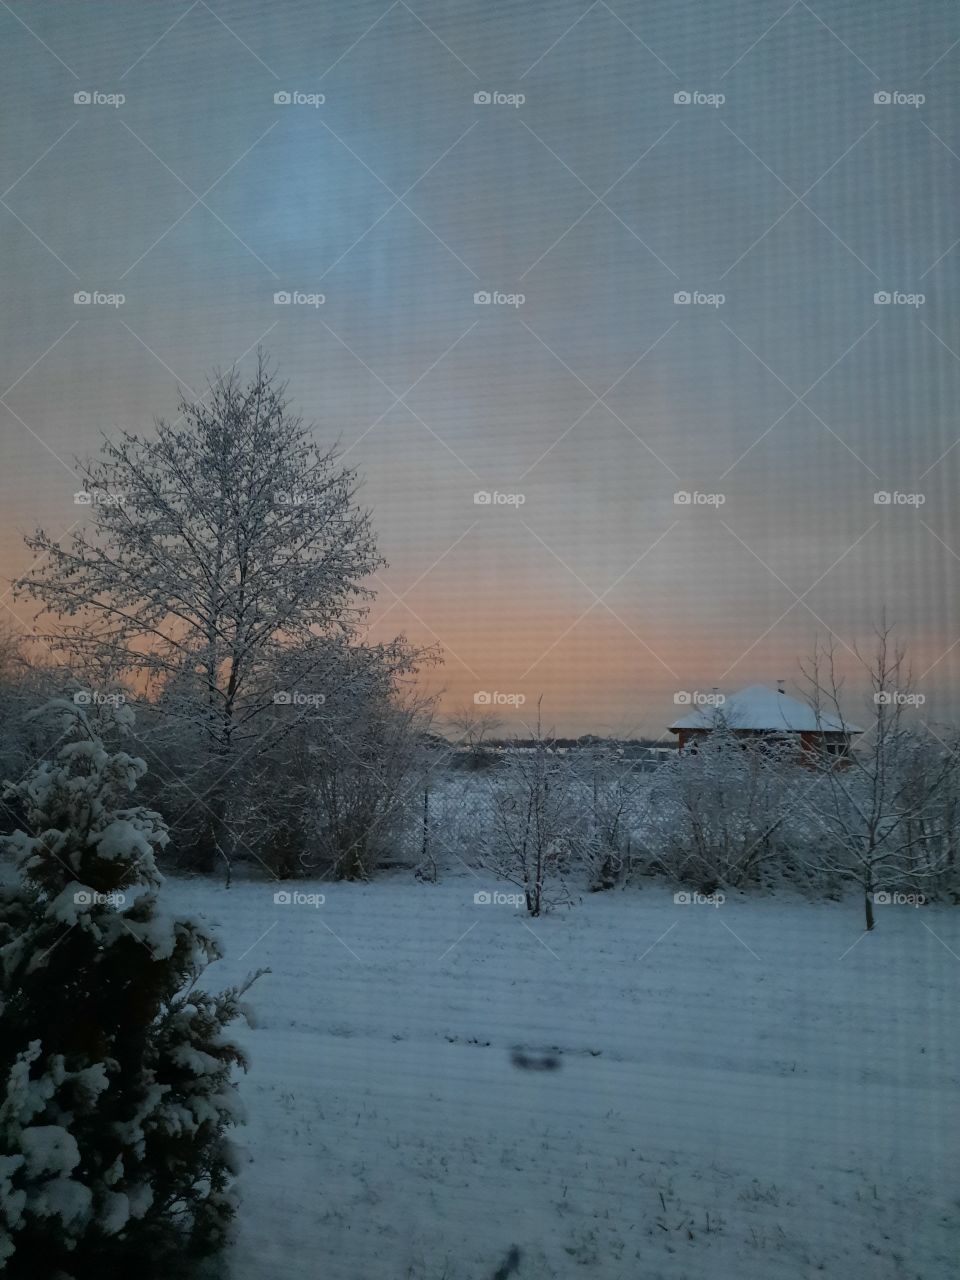 winter nature - shades of orange sky at sunrise in January seen through a window with mosquito net